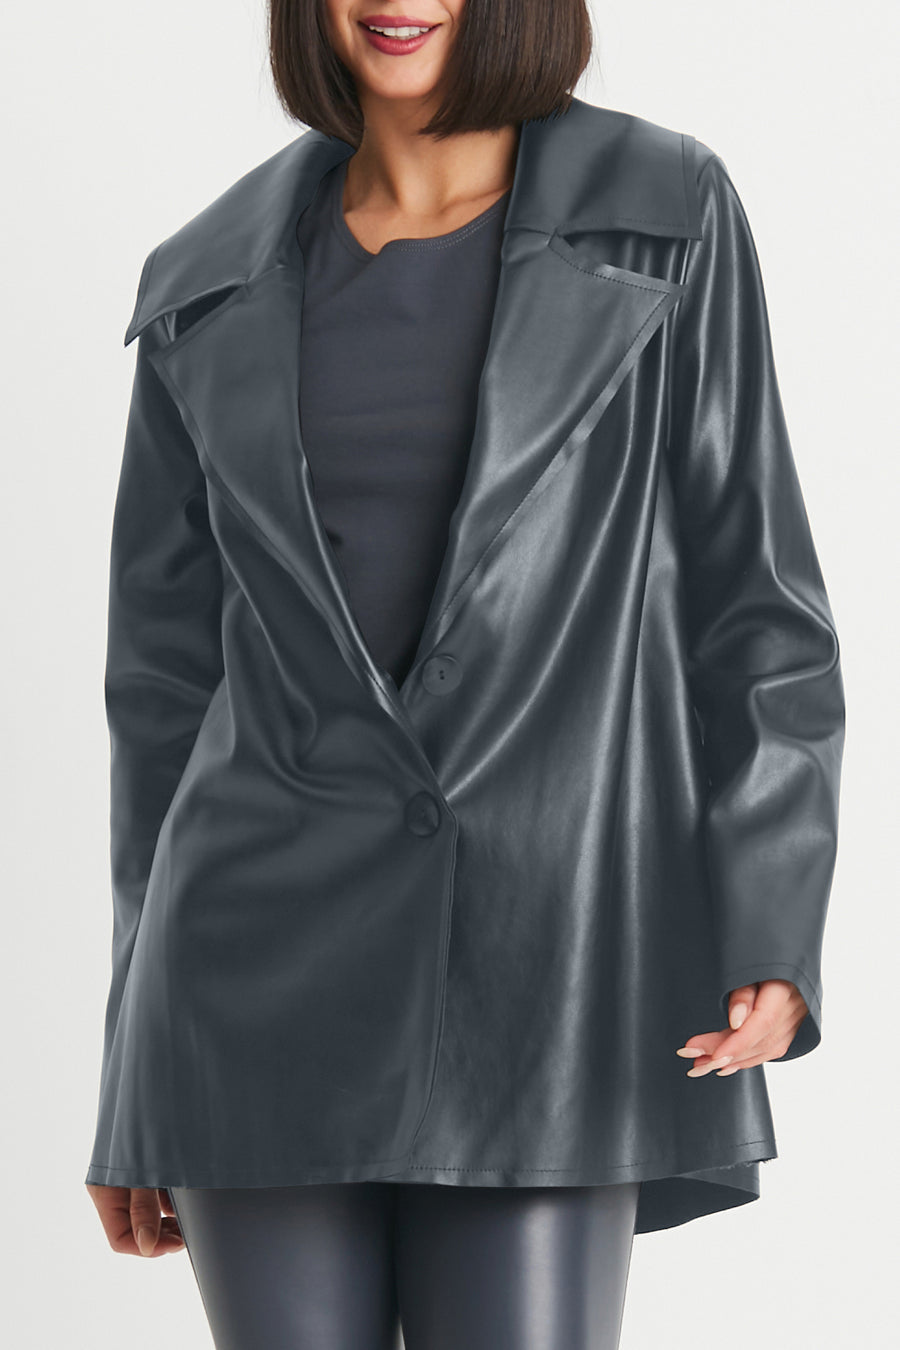 Insight Solid Vegan Leather Short Jacket With Shawl Collar & Hook & Eye  Closure In Green in Black